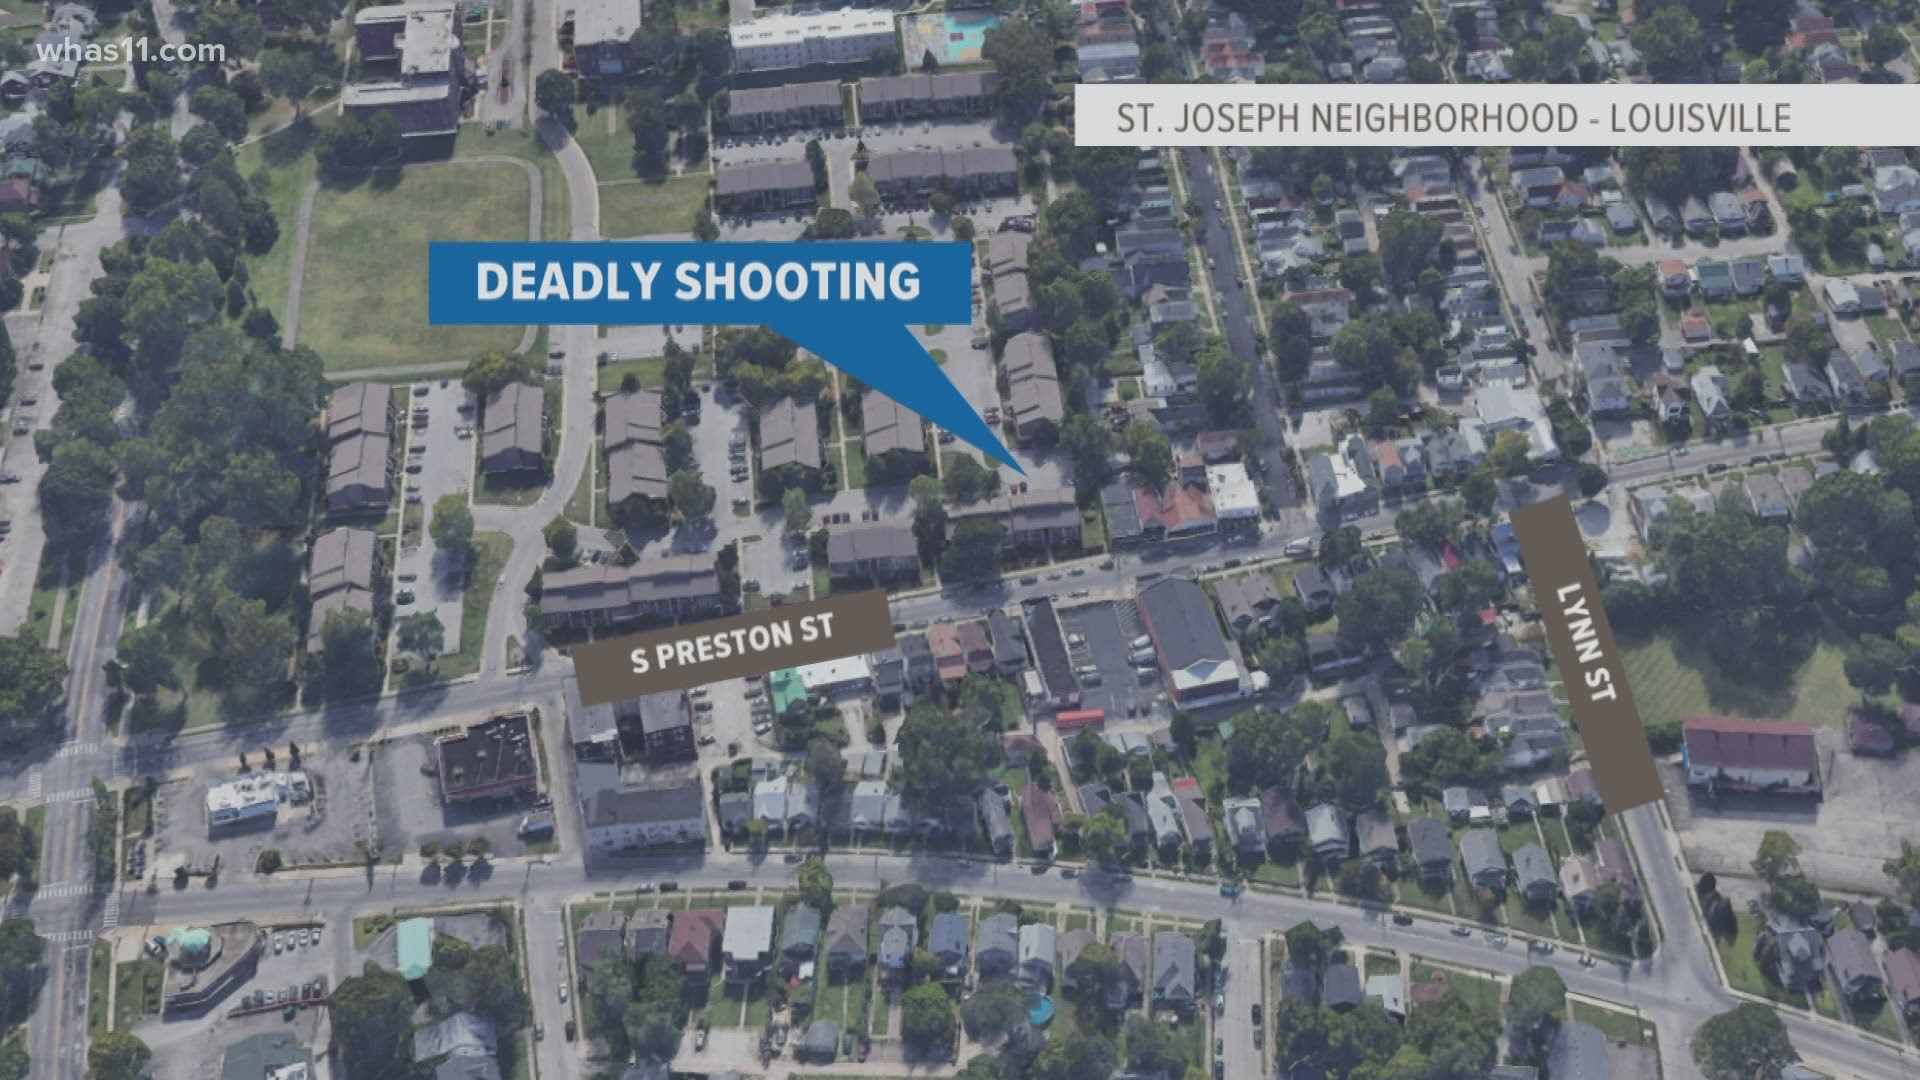 A man was shot and killed early Friday morning in the St. Joseph neighborhood near the University of Louisville campus.